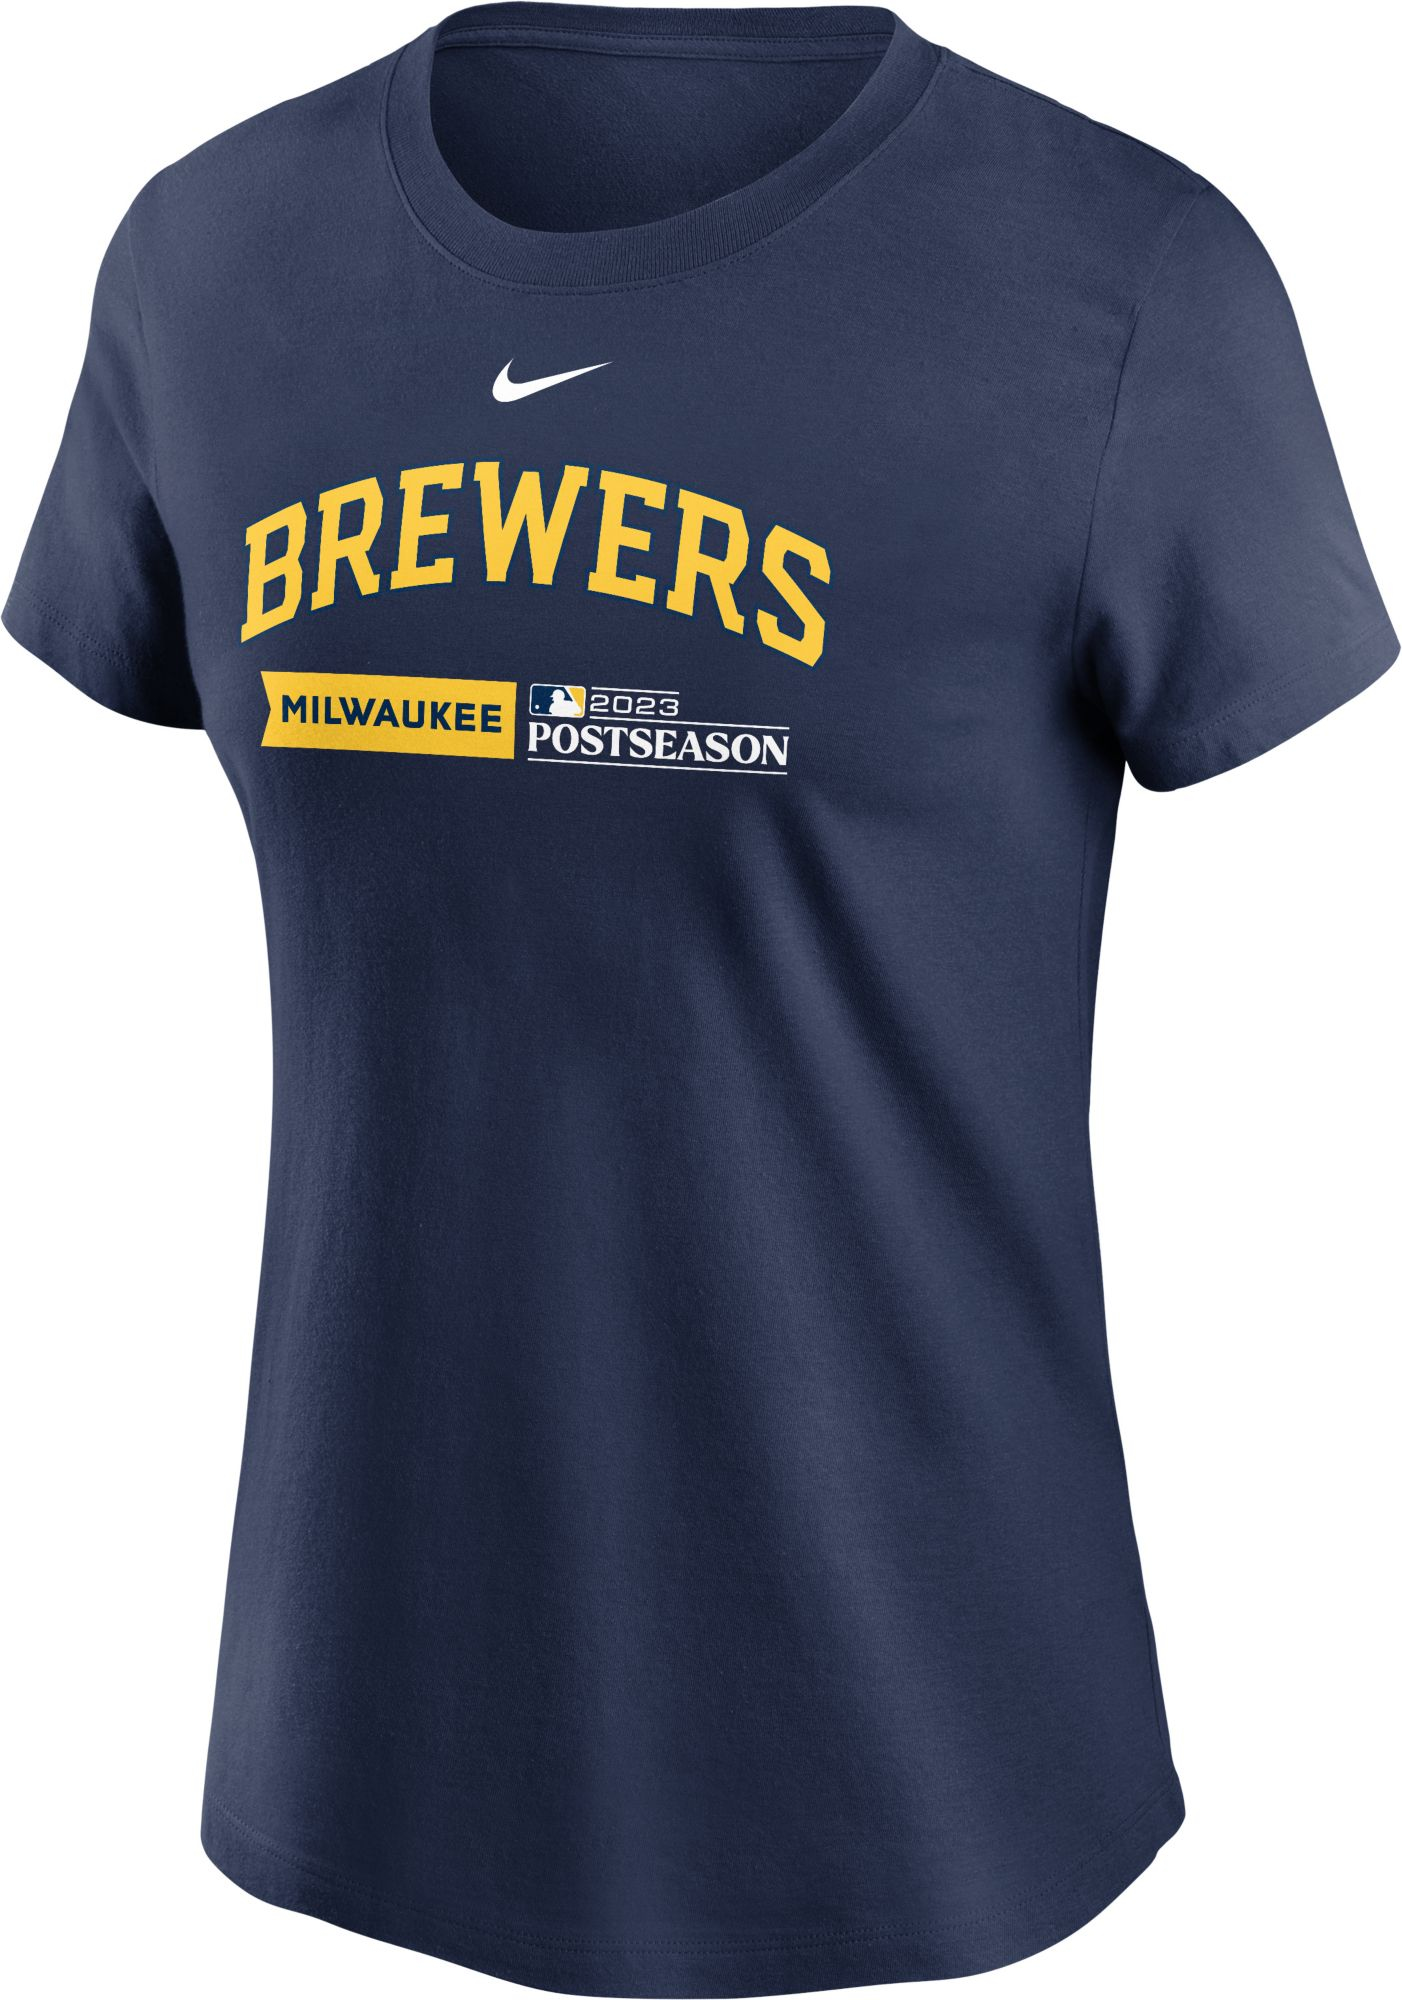 Nike Women's 2023 Postseason Milwaukee Brewers Authentic Collection T-Shirt, XL, Blue | Holiday Gift